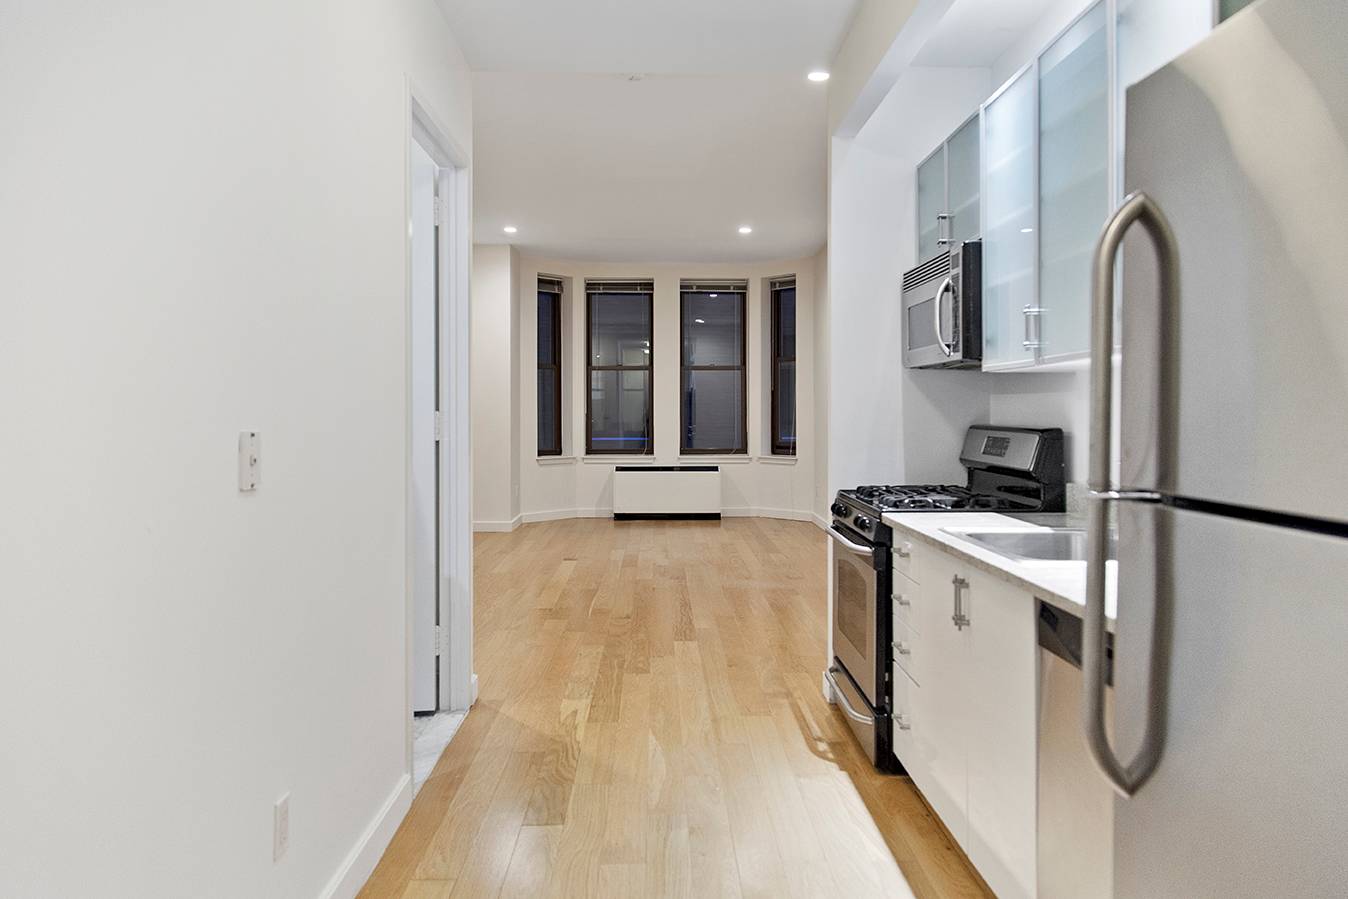 Wall Street studio which features a large walk-in-closet